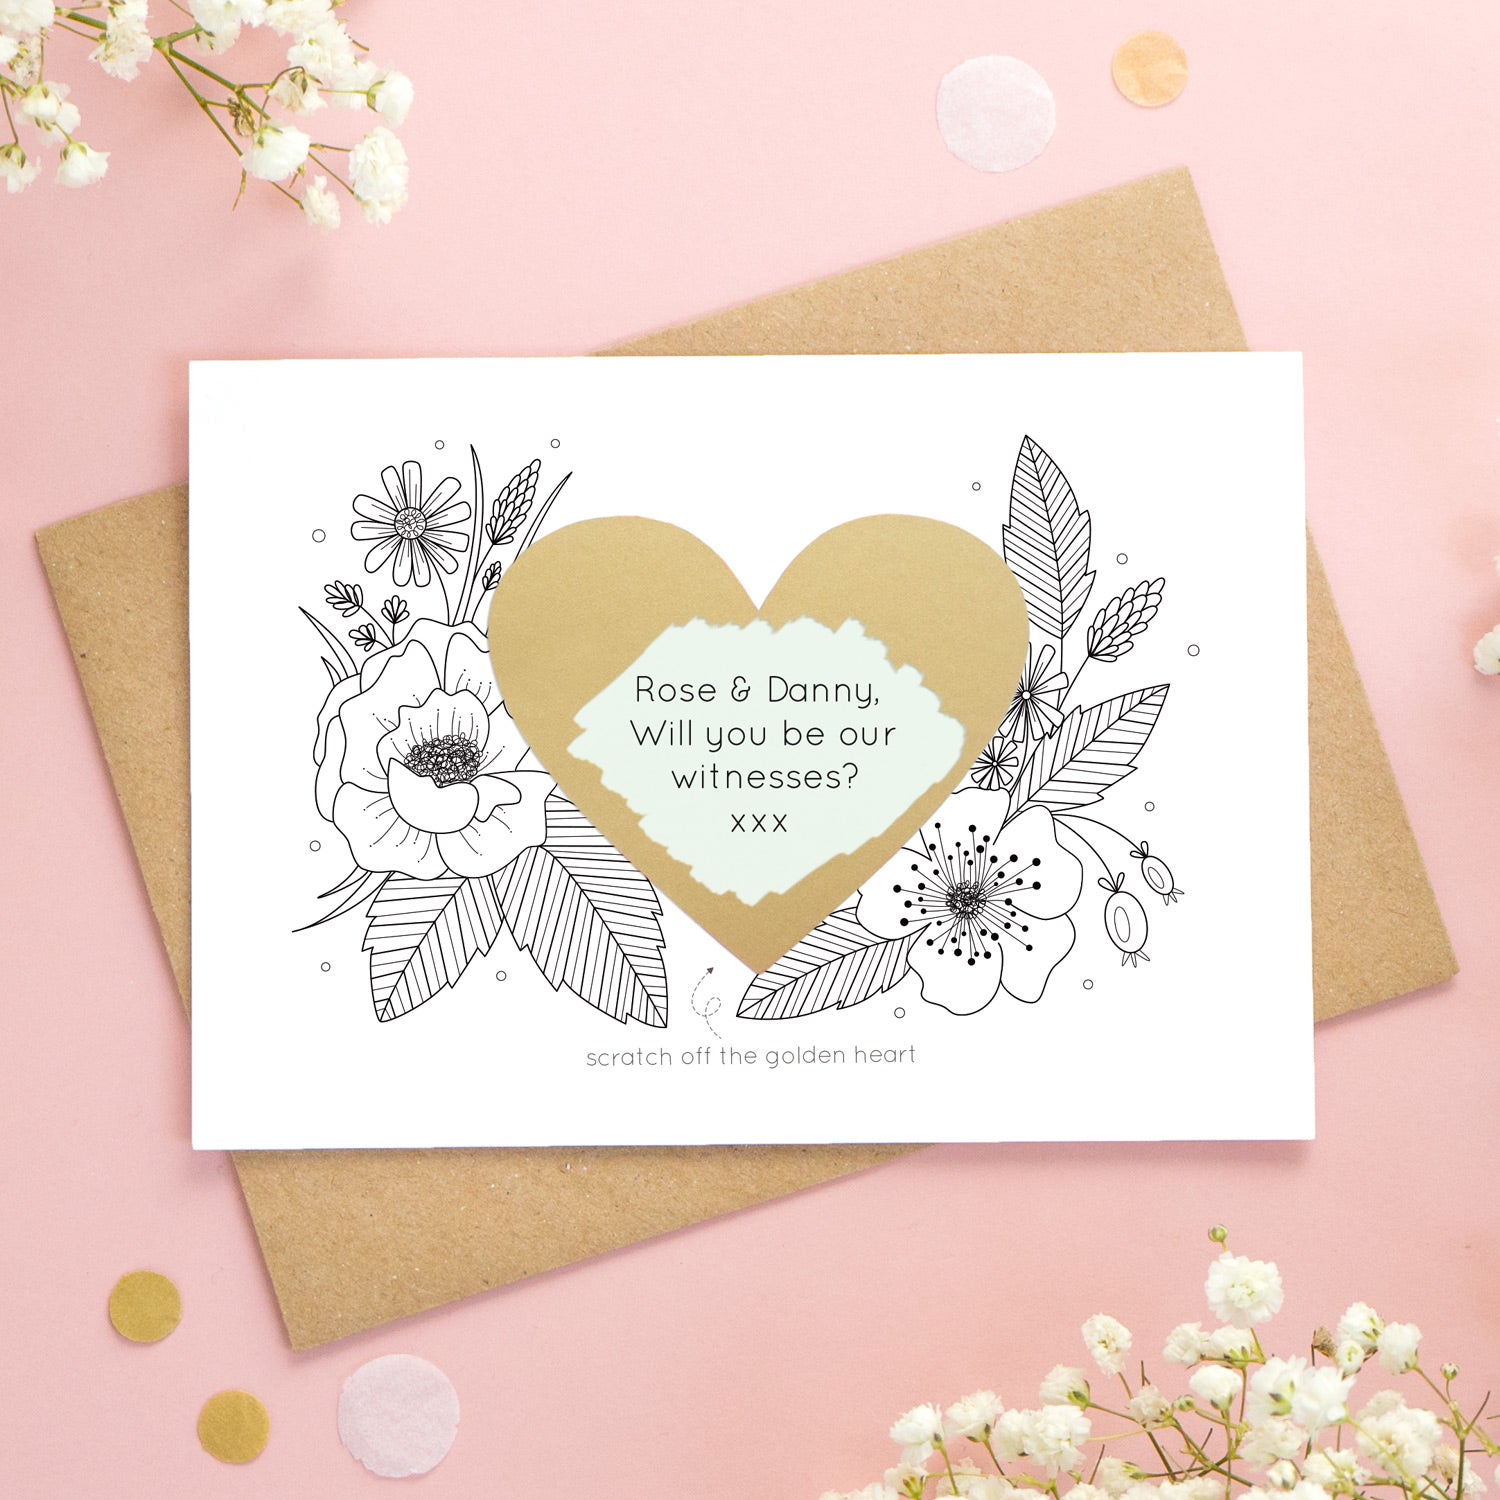 A personalised wedding scratch card shot on a pink background with white flowers. The golden heart has been scratched revealing a green heart and a witness proposal!